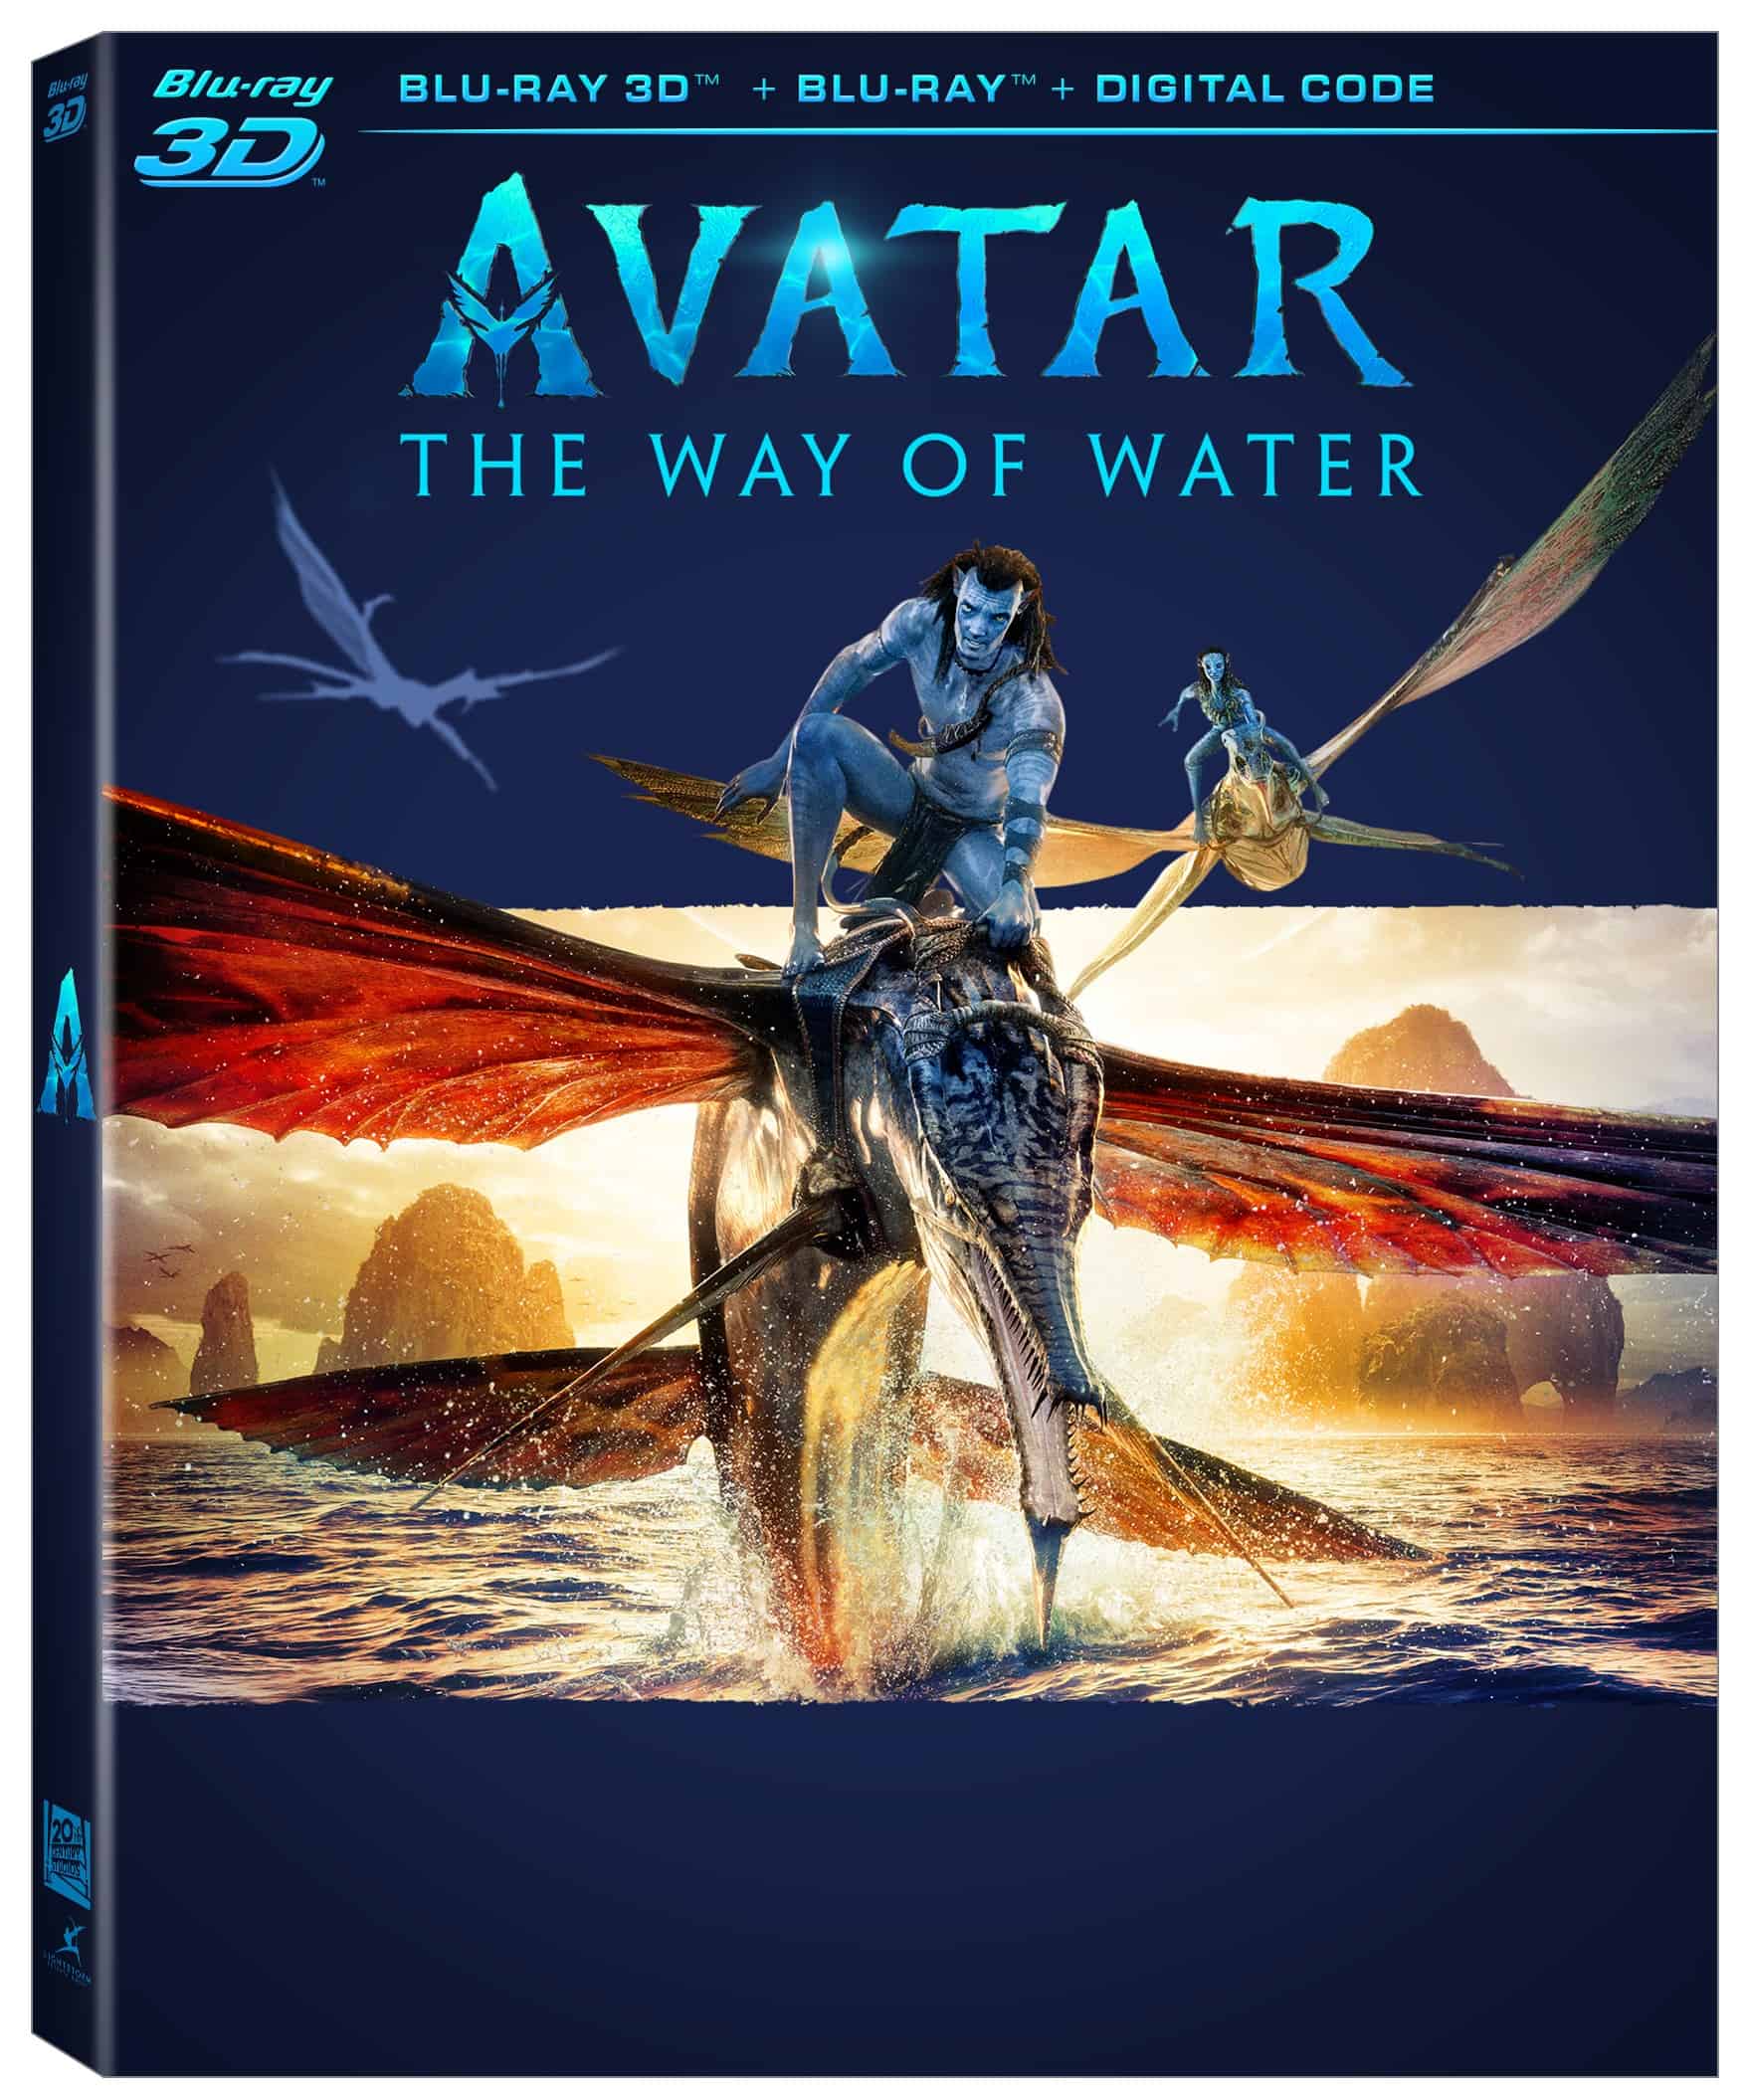 Double Celebration for Avatar Fans: The Arrival of Avatar: The Way of Water and the Ultimate Avatar Experience in 4K UHD 21